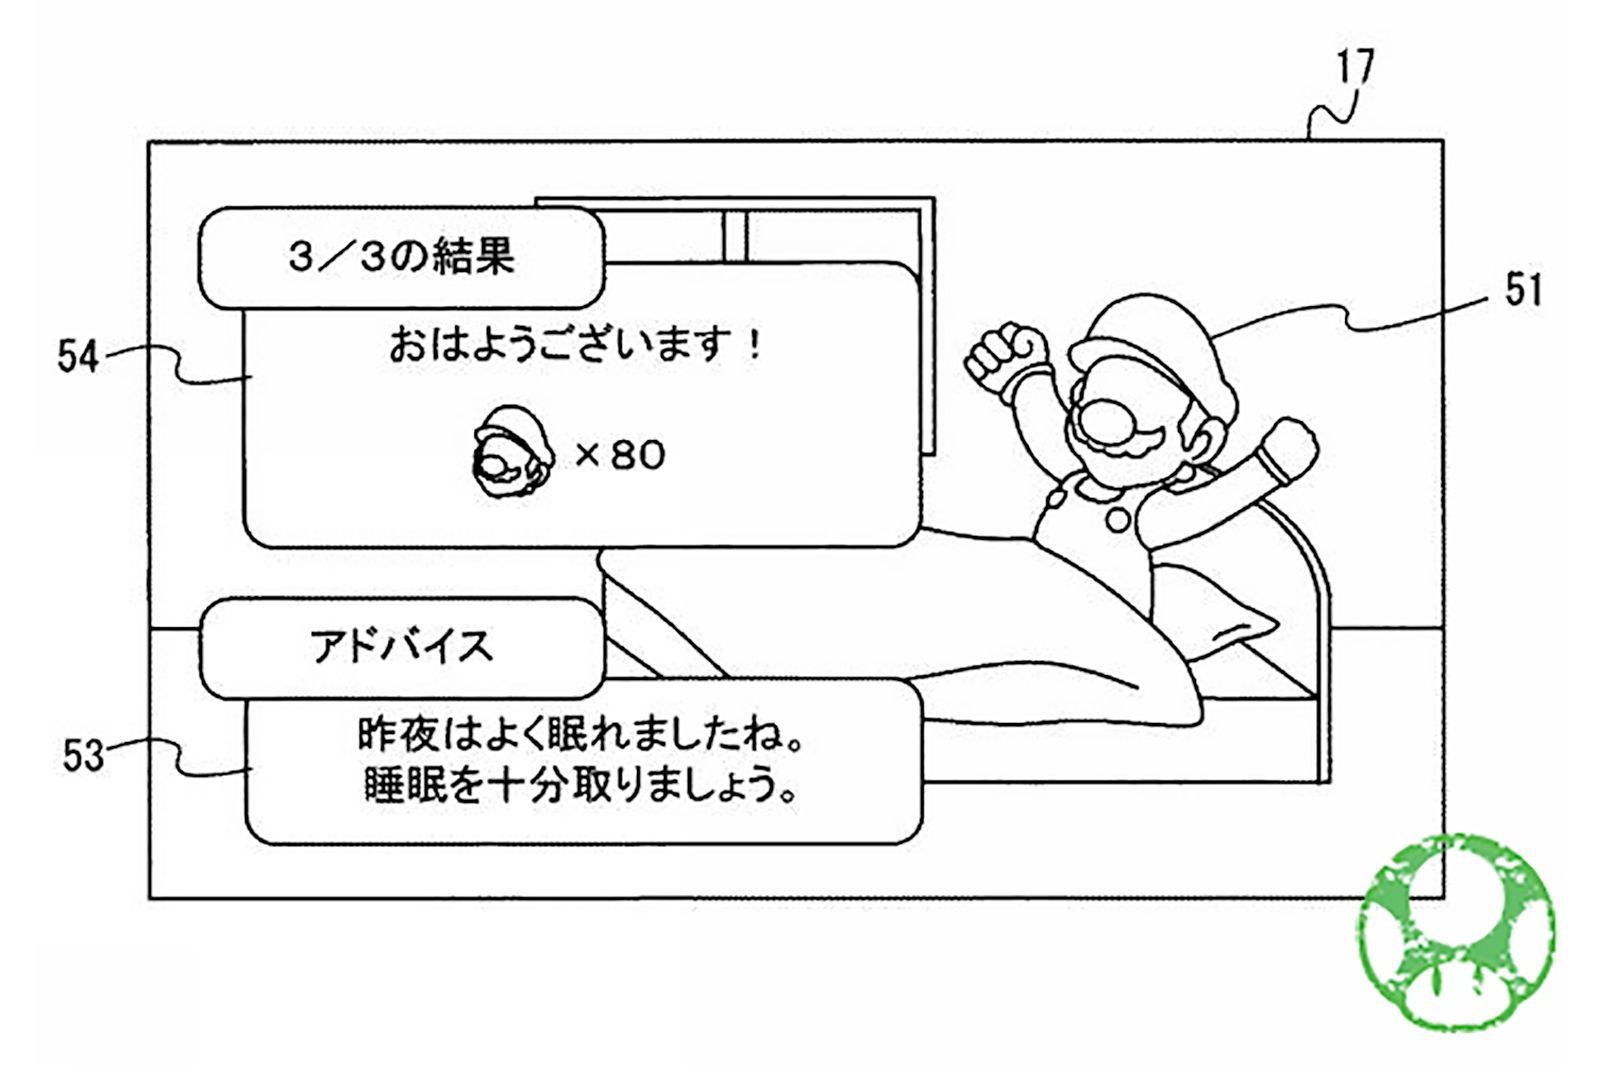 Nintendos Not Yet Given Up On Quality Of Life Devices New Sleep Tracker Patent Found image 3